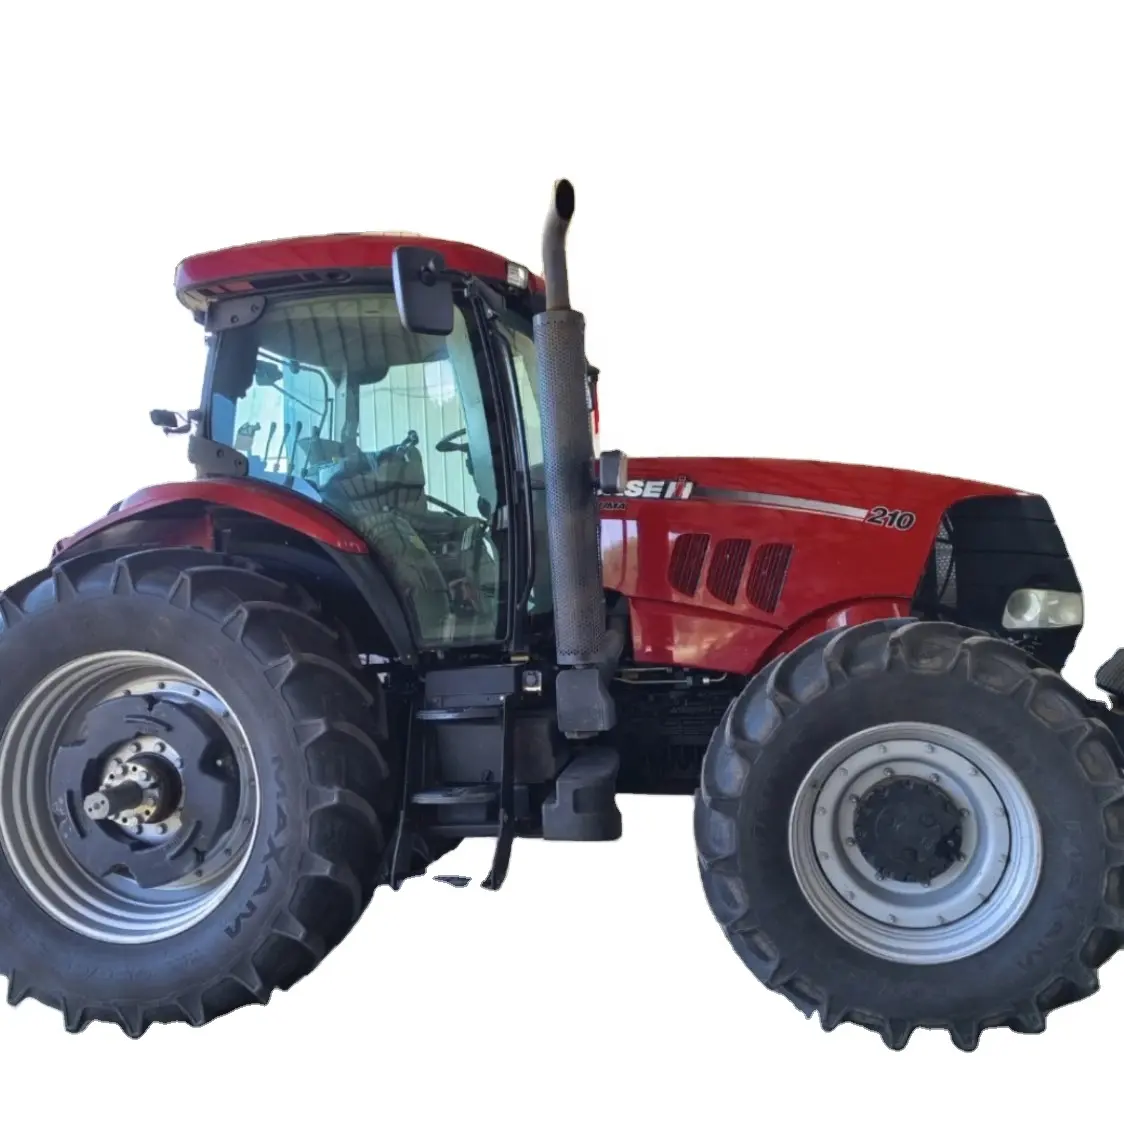 Super horsepower tractor is a brand-new second-hand tractor with 4*4 specifications, which is affordable and cheap.